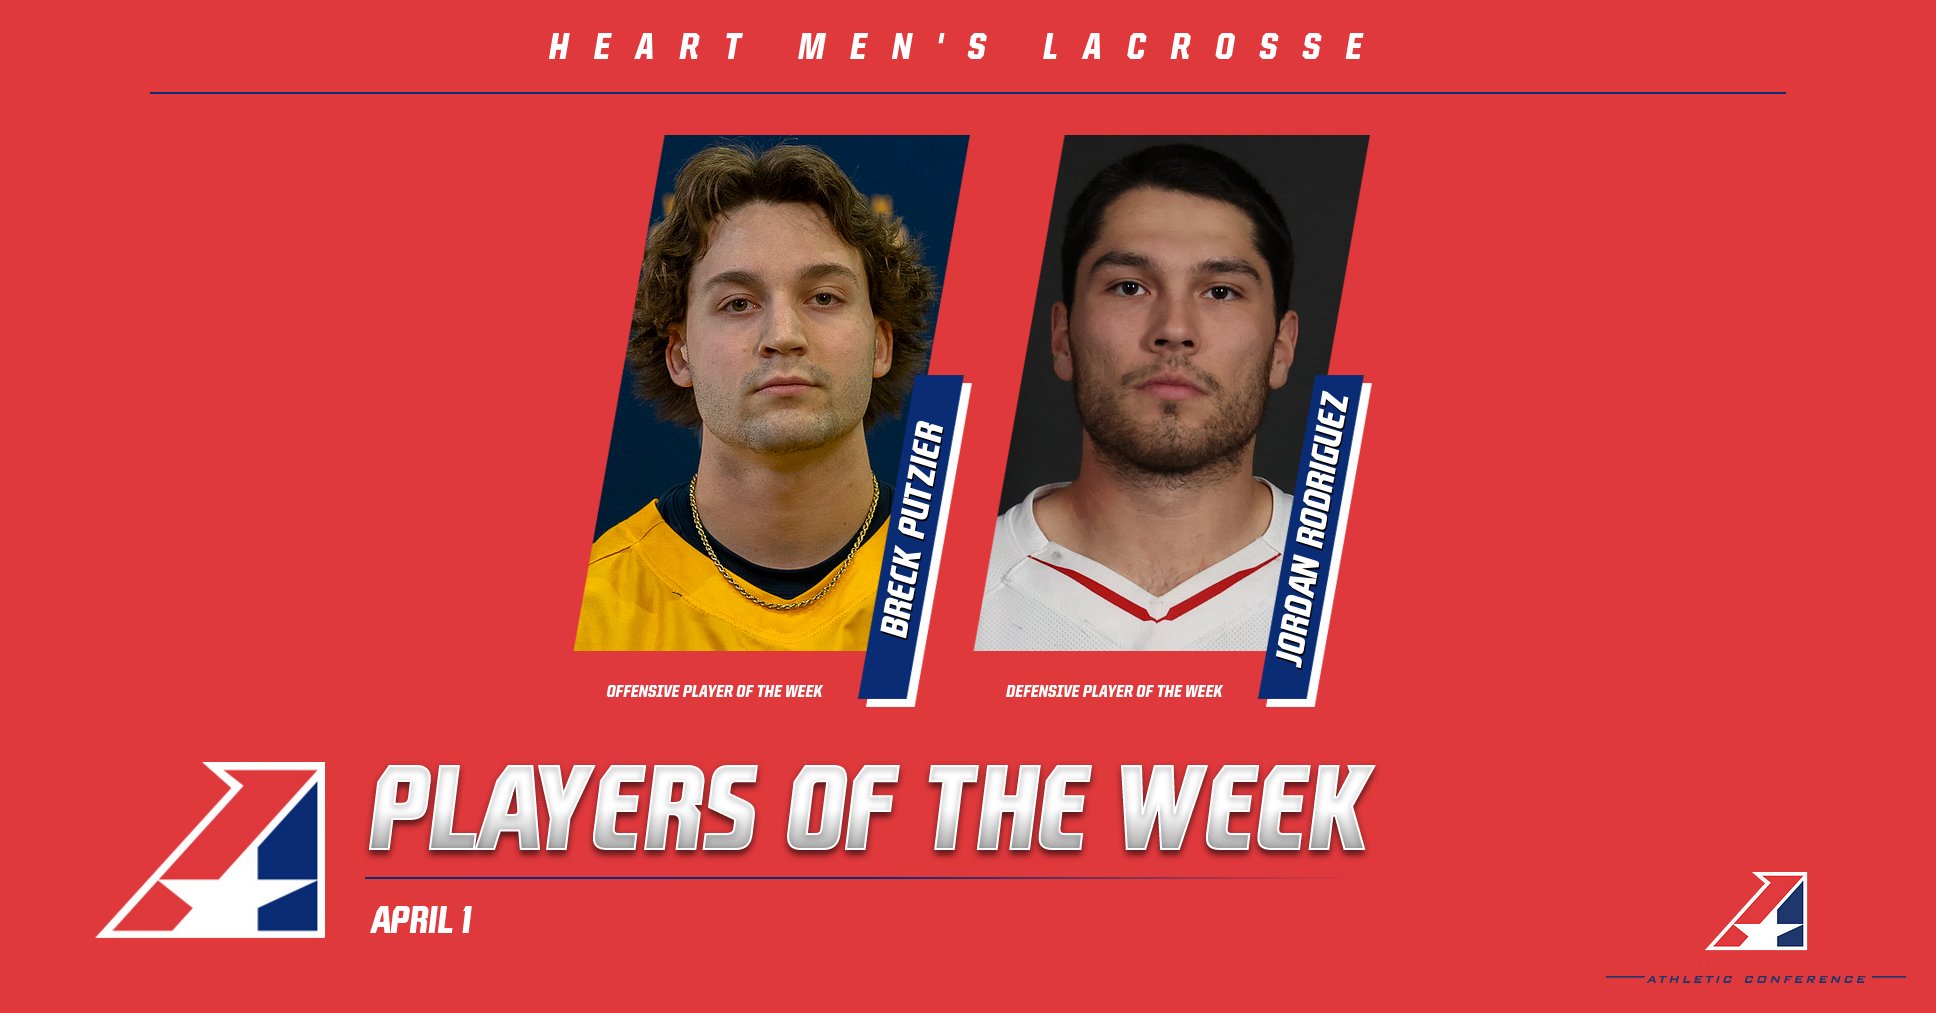 Heart Men’s Lacrosse Players of the Week Announced – April 1